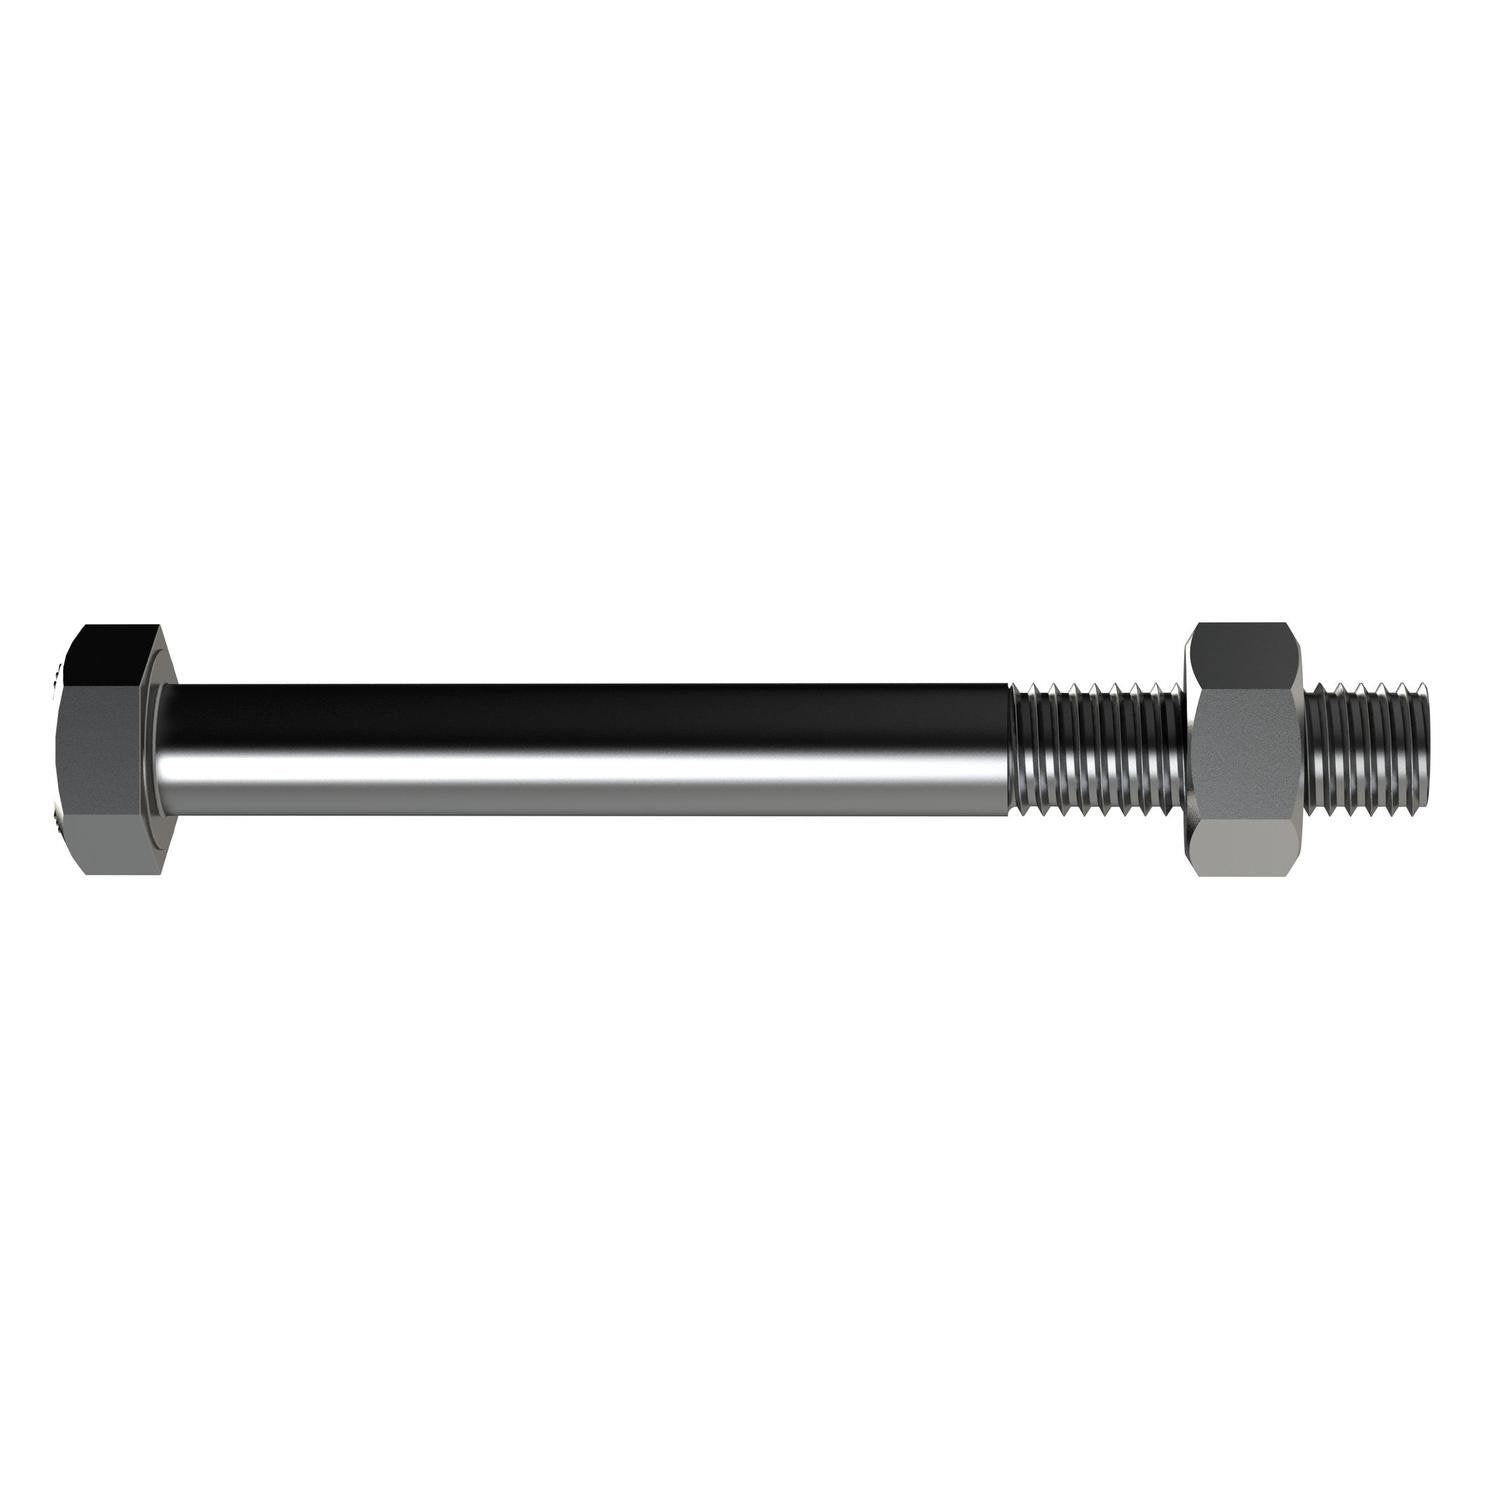 Bremick Engineer Bolt & Nut M12 X 240Mm Stainless Steel